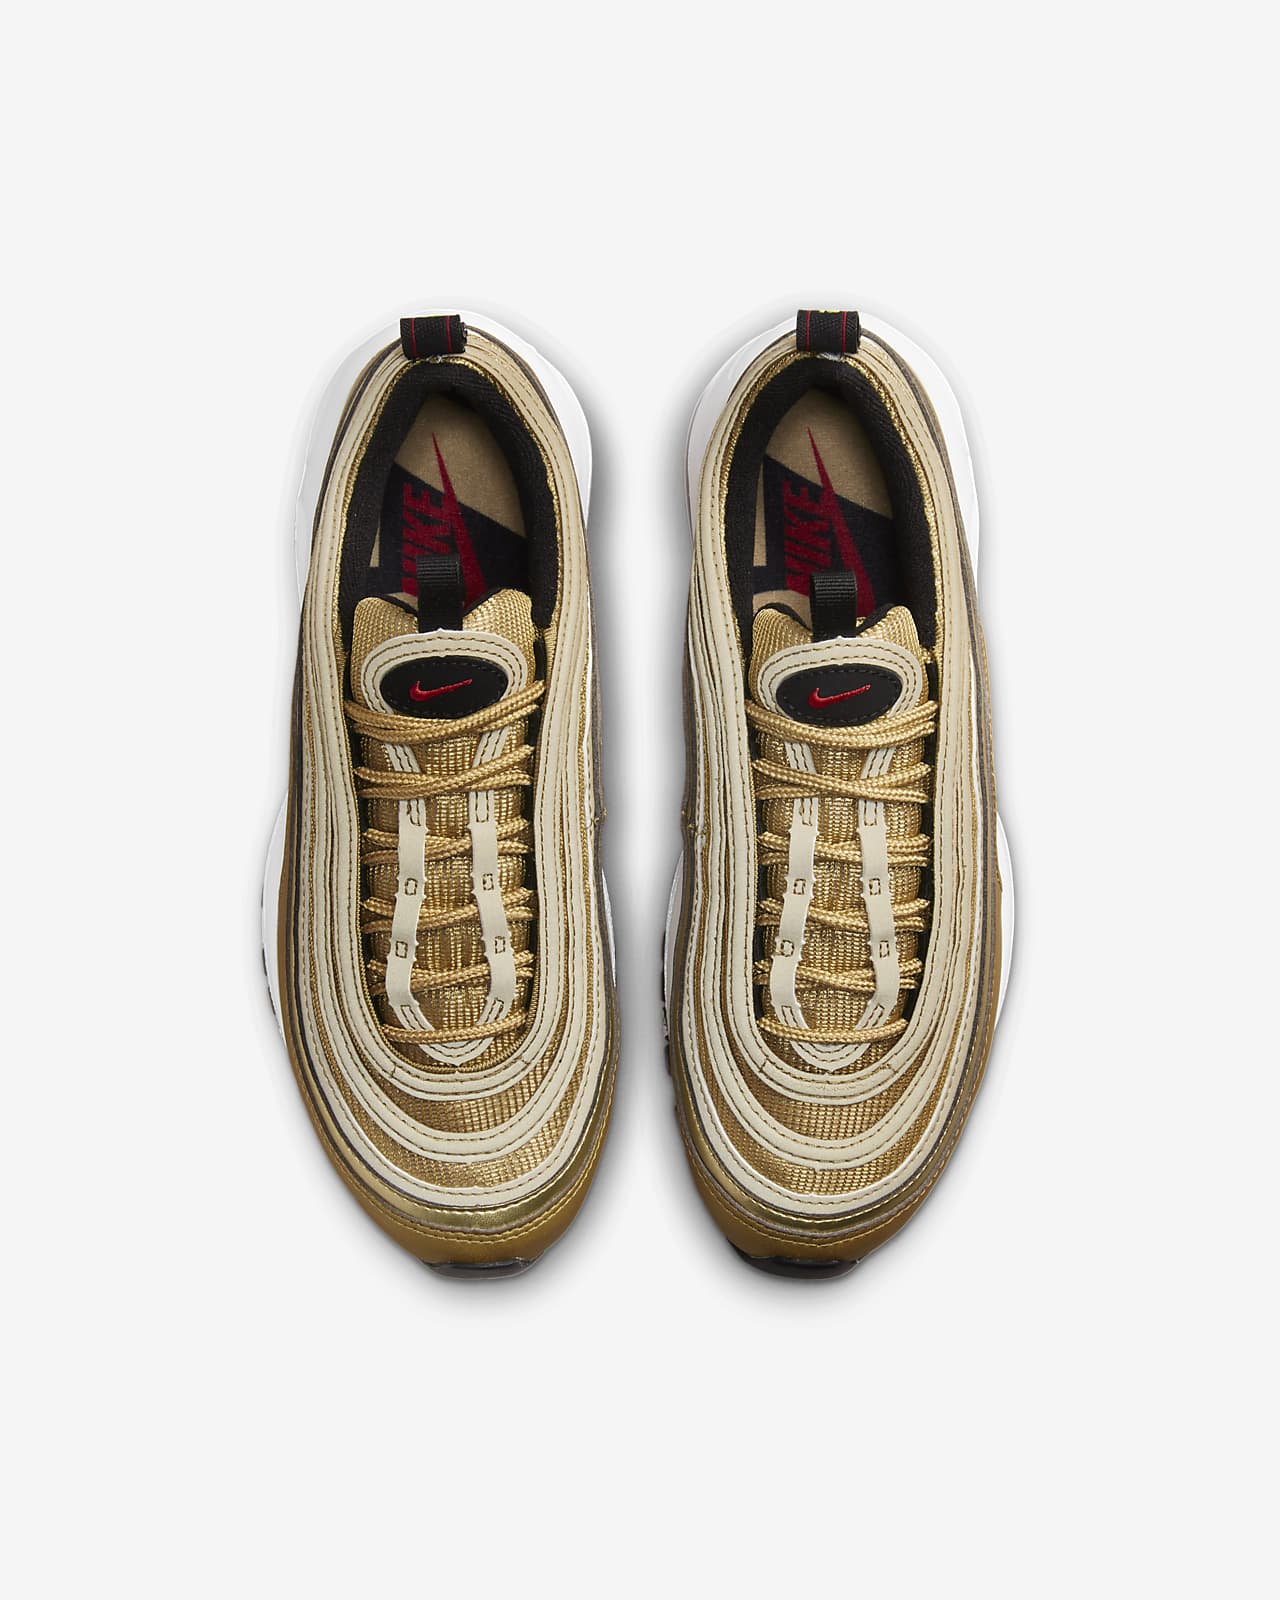 Nike Air Max 97 Younger Kids' Shoes